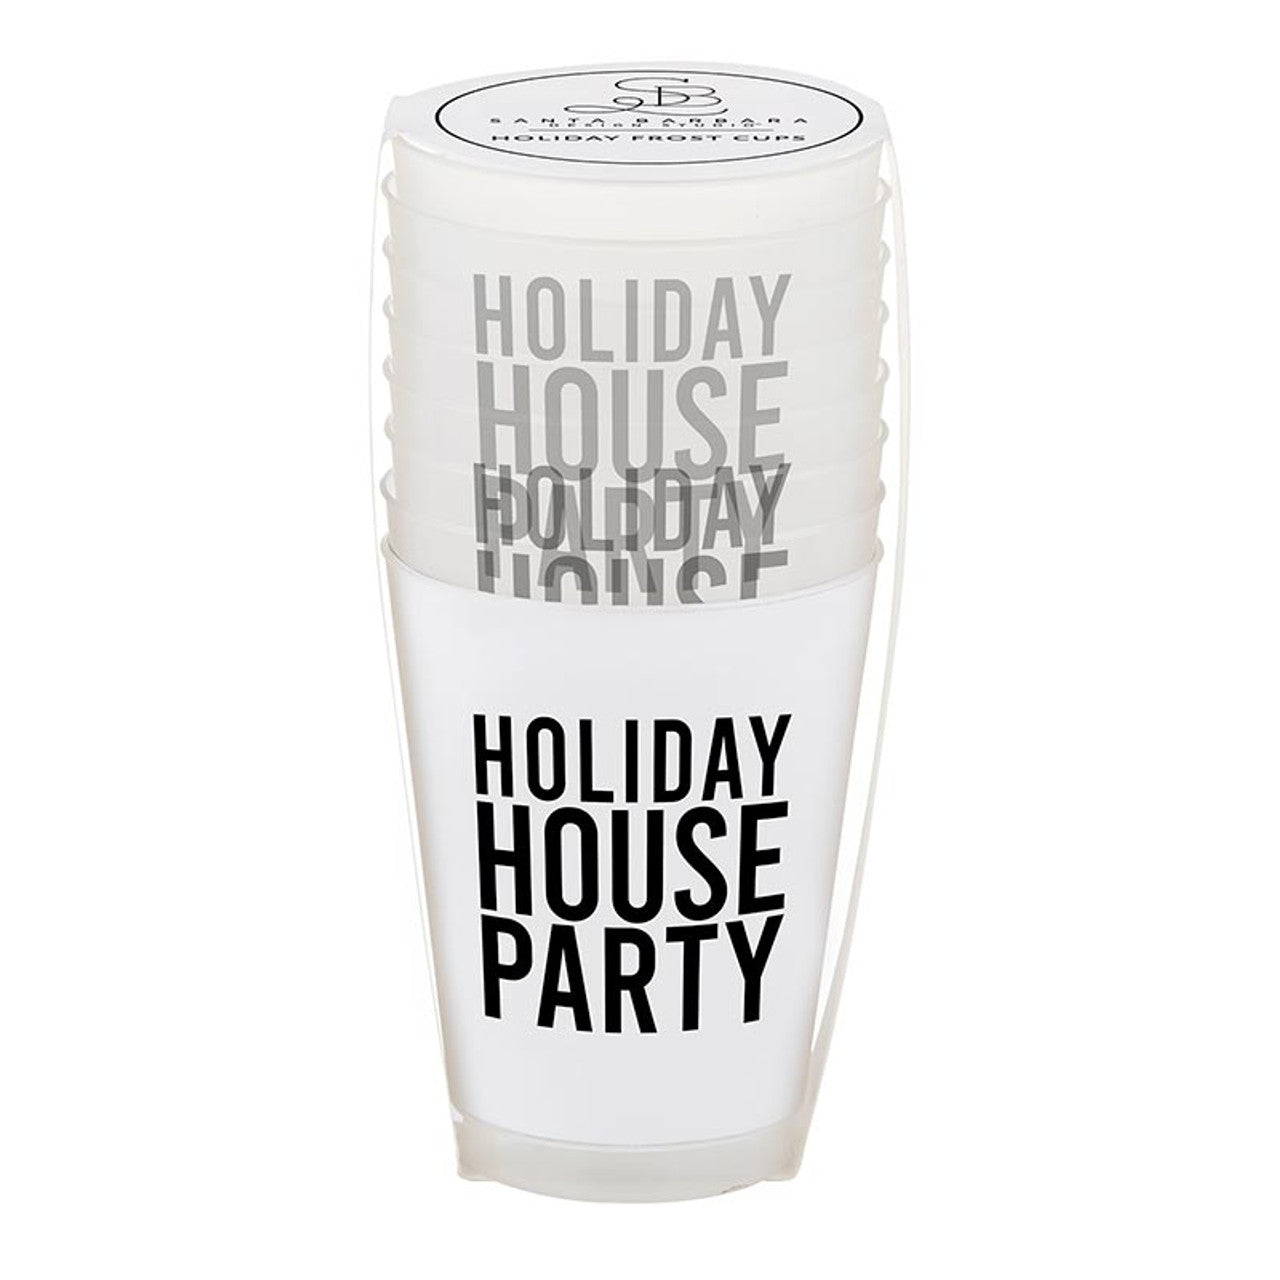 Holiday House Party Cup Set